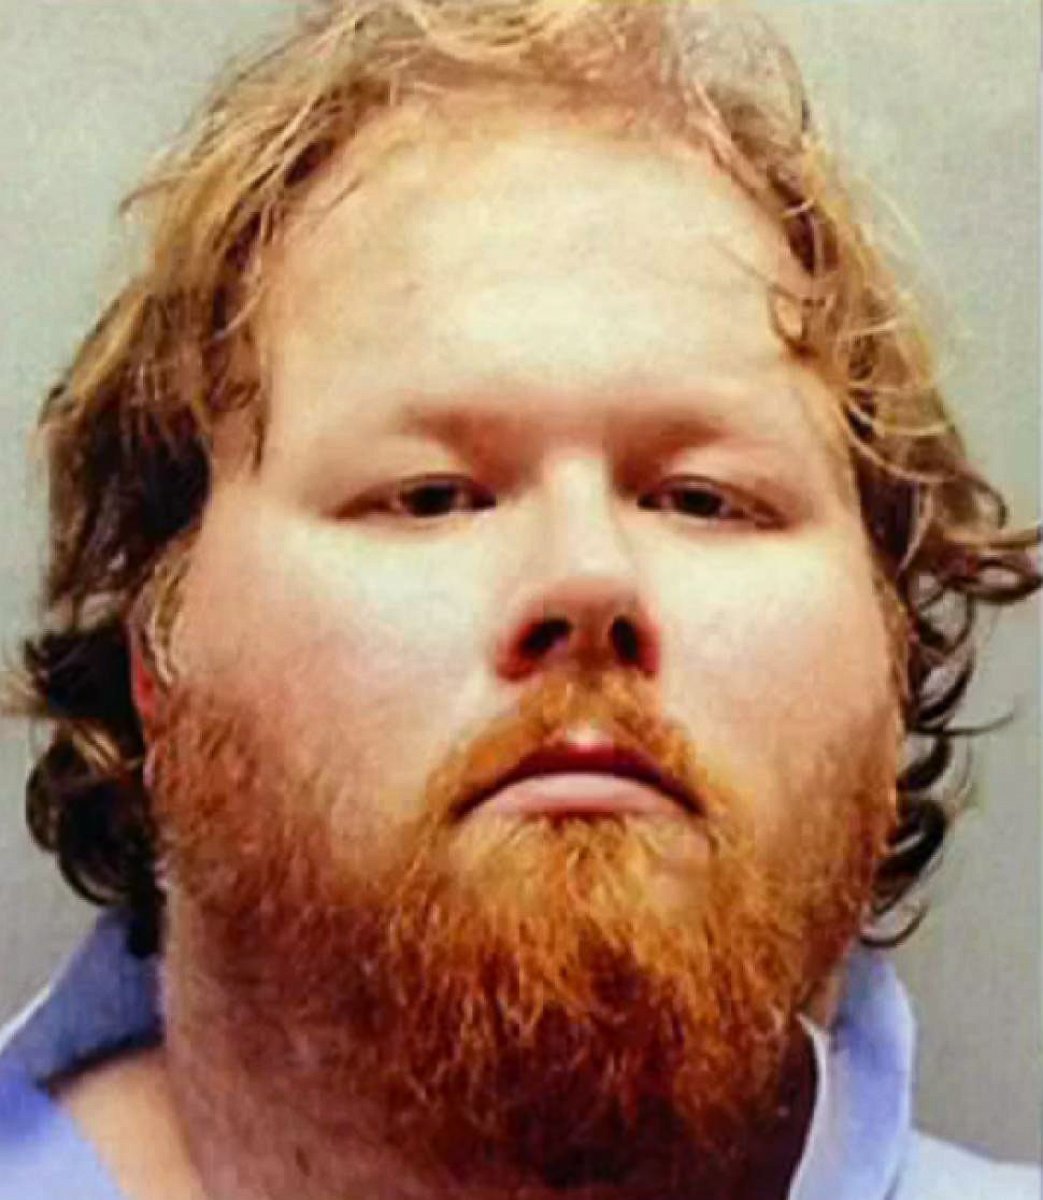 PHOTO: Authorities have identified Ron Lee Haskell, 34, as the suspect in a July 9, 2014 shooting in Spring, Texas. 